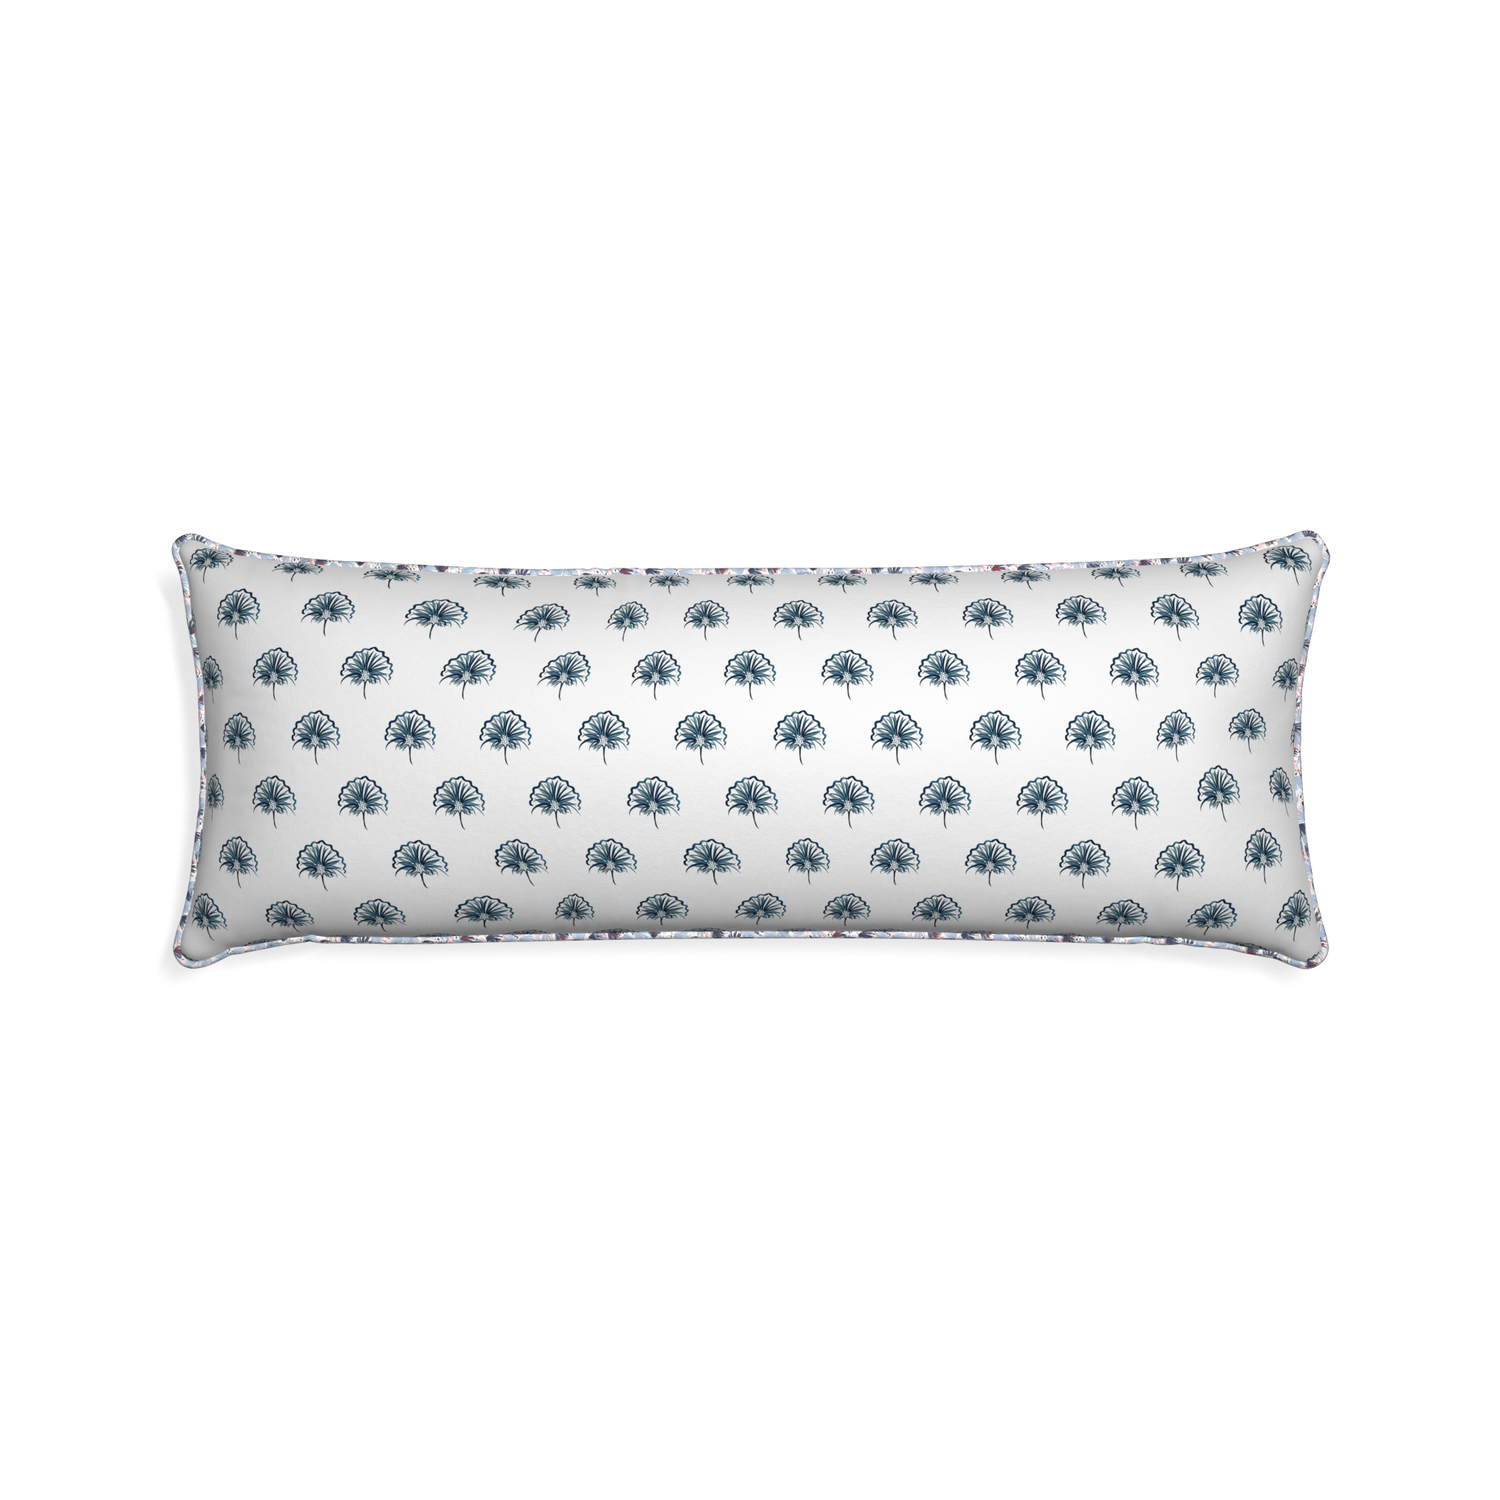 Xl-lumbar penelope midnight custom floral navypillow with e piping on white background